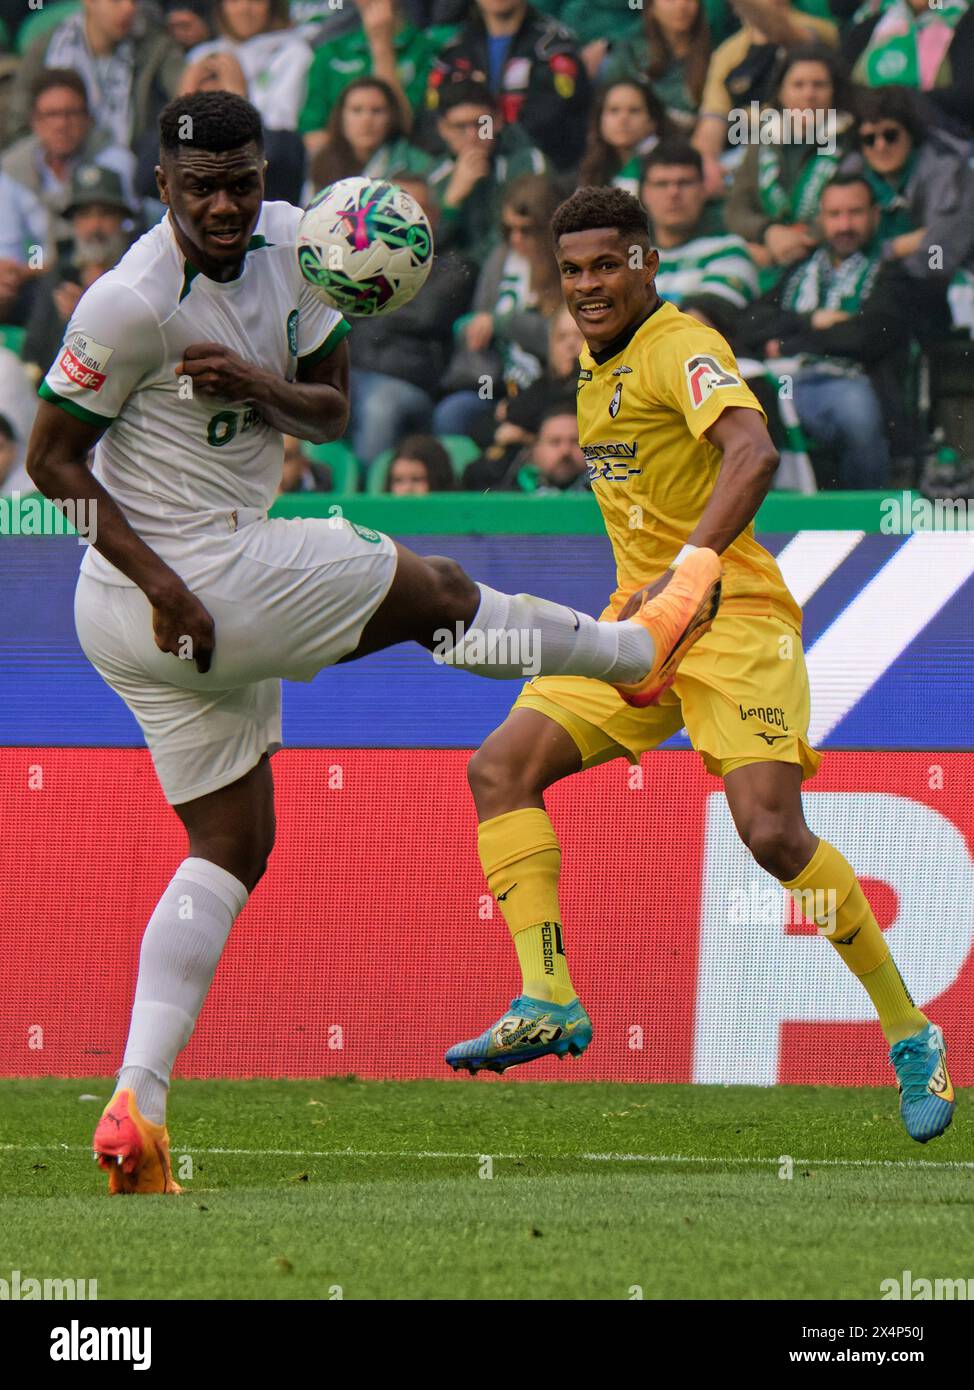 Lisbon, Portugal. 04th May, 2024. Lisbon, Portugal, May 04 2024: Ousmane Diomande (26 Sporting CP) and Helio Varela (77 Portimonense SC) in action during the Liga Portugal game between Sporting CP and Portimonense SC at Estadio Jose Alvalade in Lisbon, Portugal. (Pedro Porru/SPP) Credit: SPP Sport Press Photo. /Alamy Live News Stock Photo